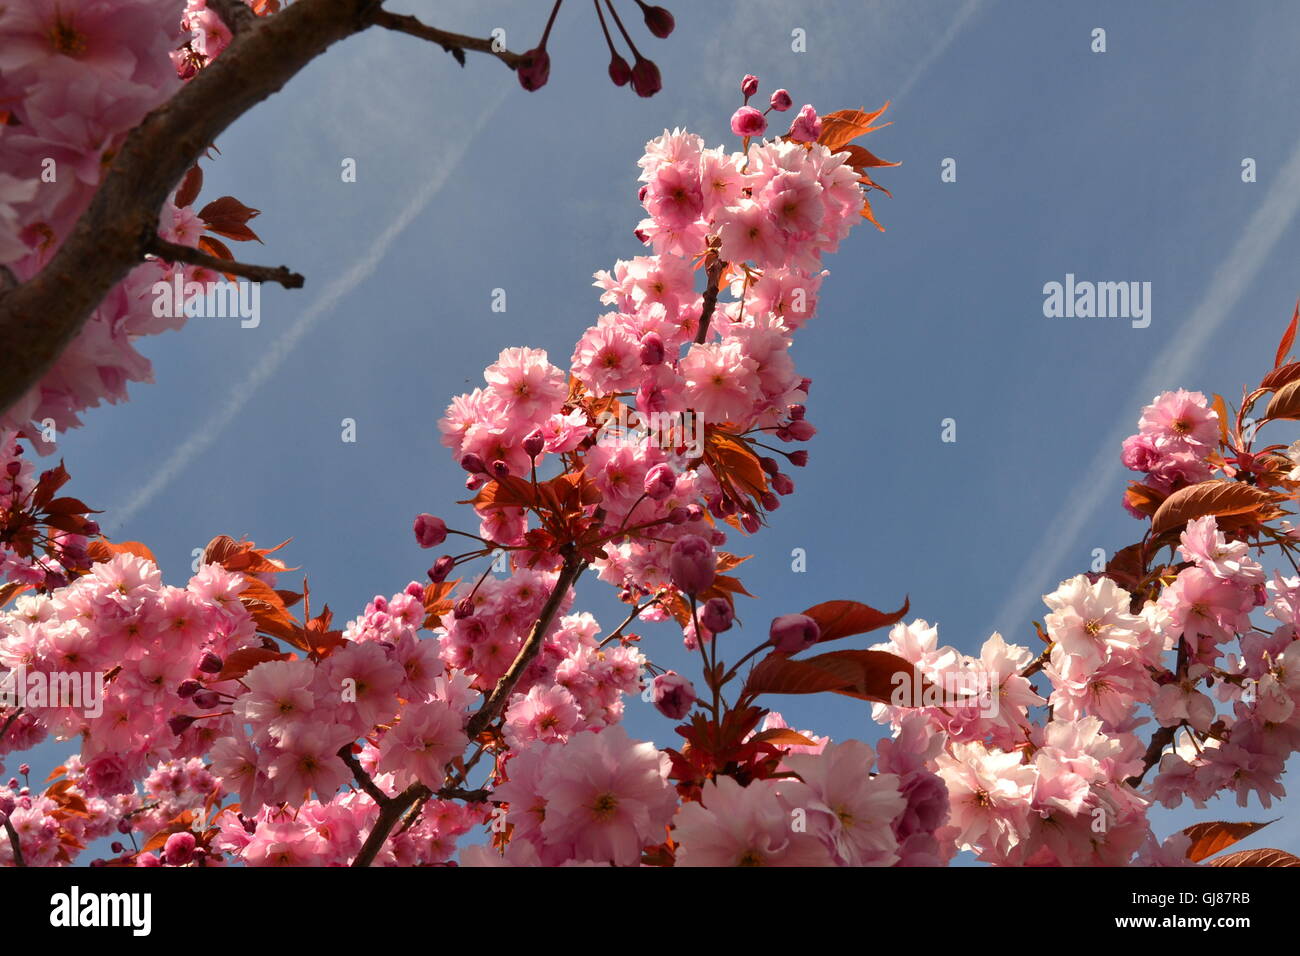 Pink Cherry Tree Blossom flowers against a blue sky with chemtrails Stock Photo